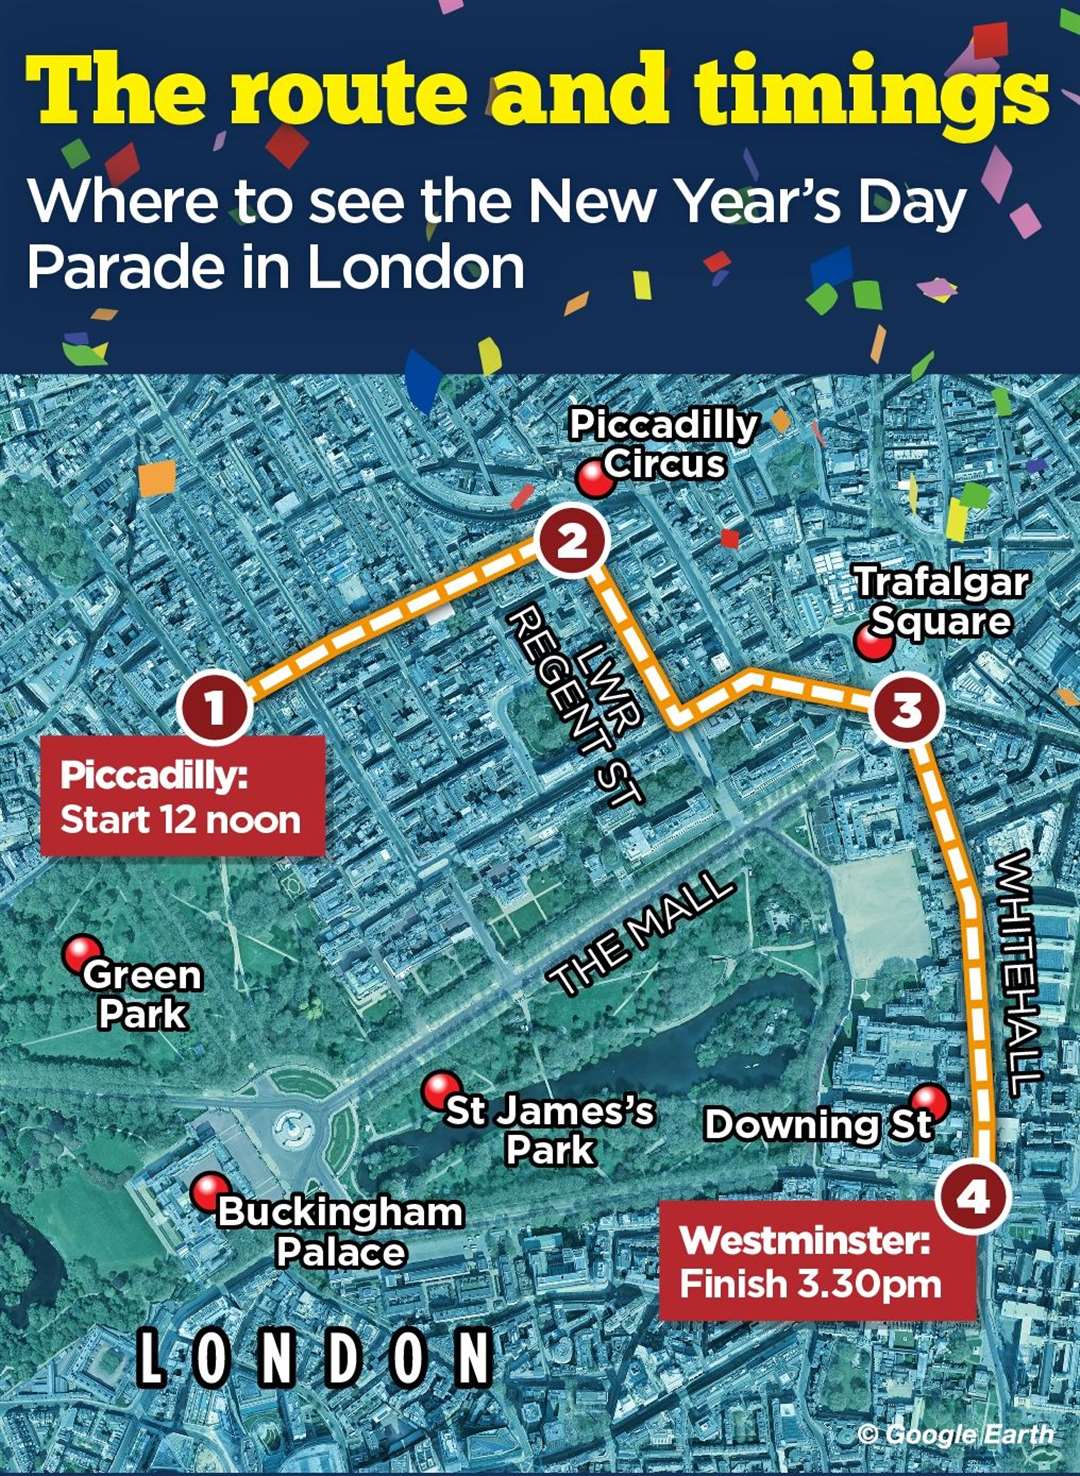 The parade route